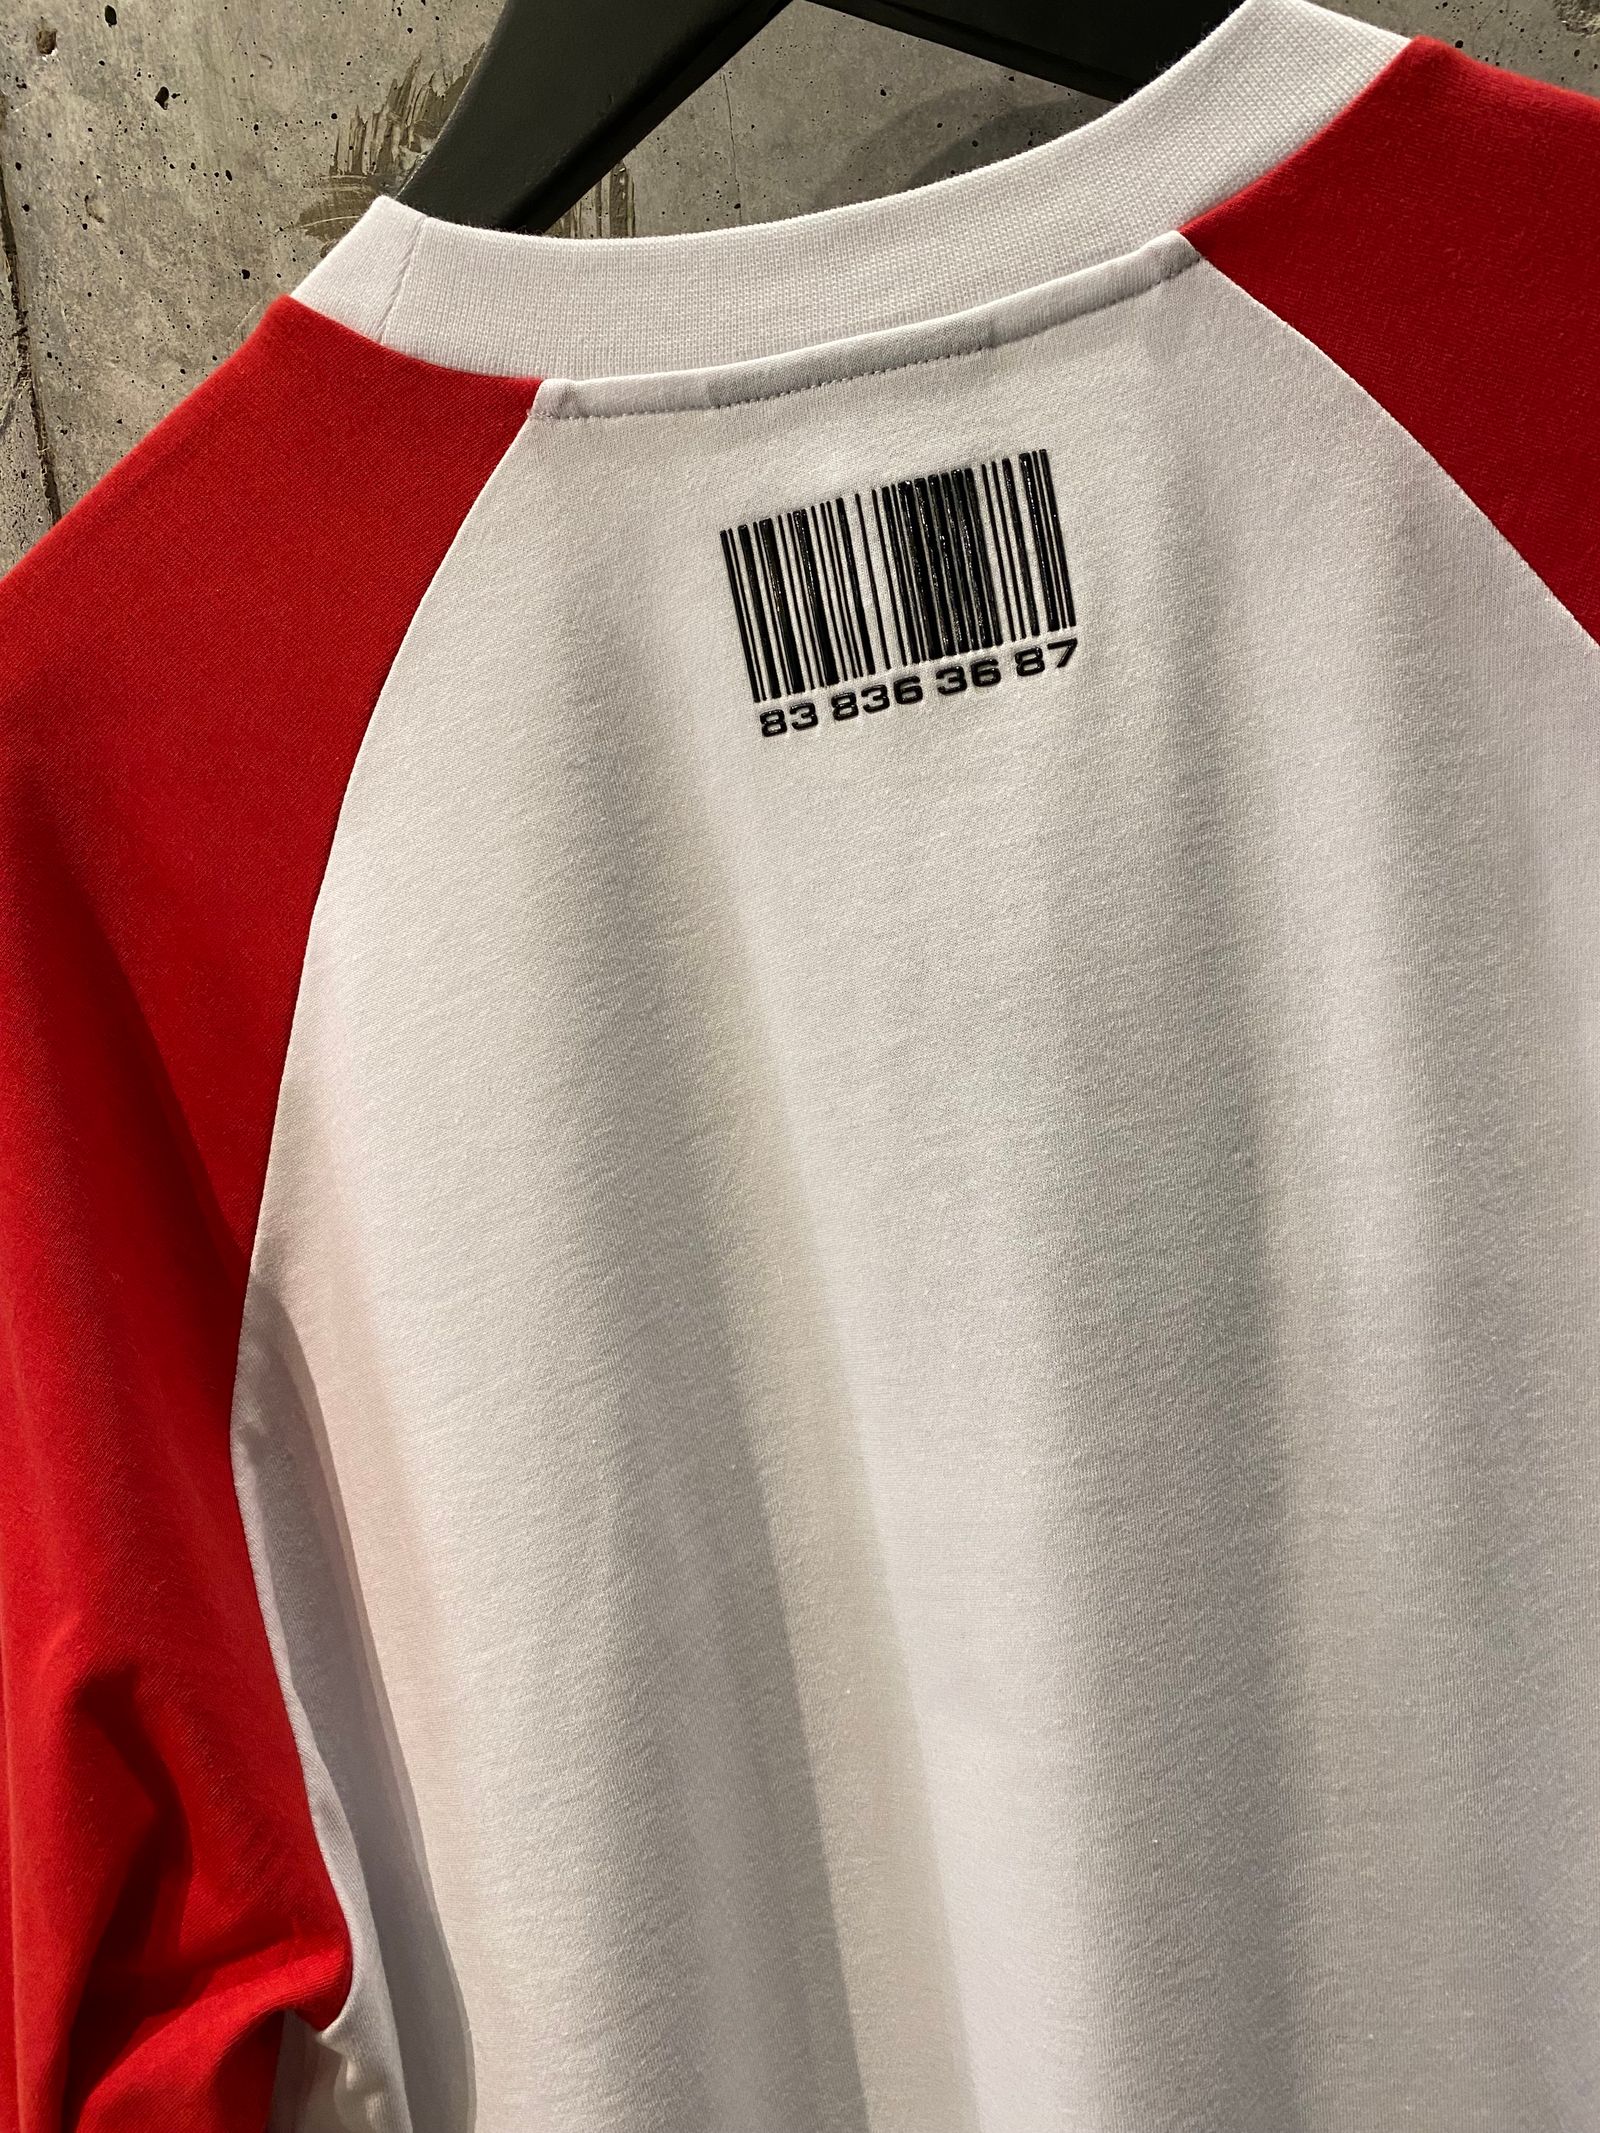 VTMNTS - VTMNTS RAGLAN LONGSLEEVE/RED | R and another stories